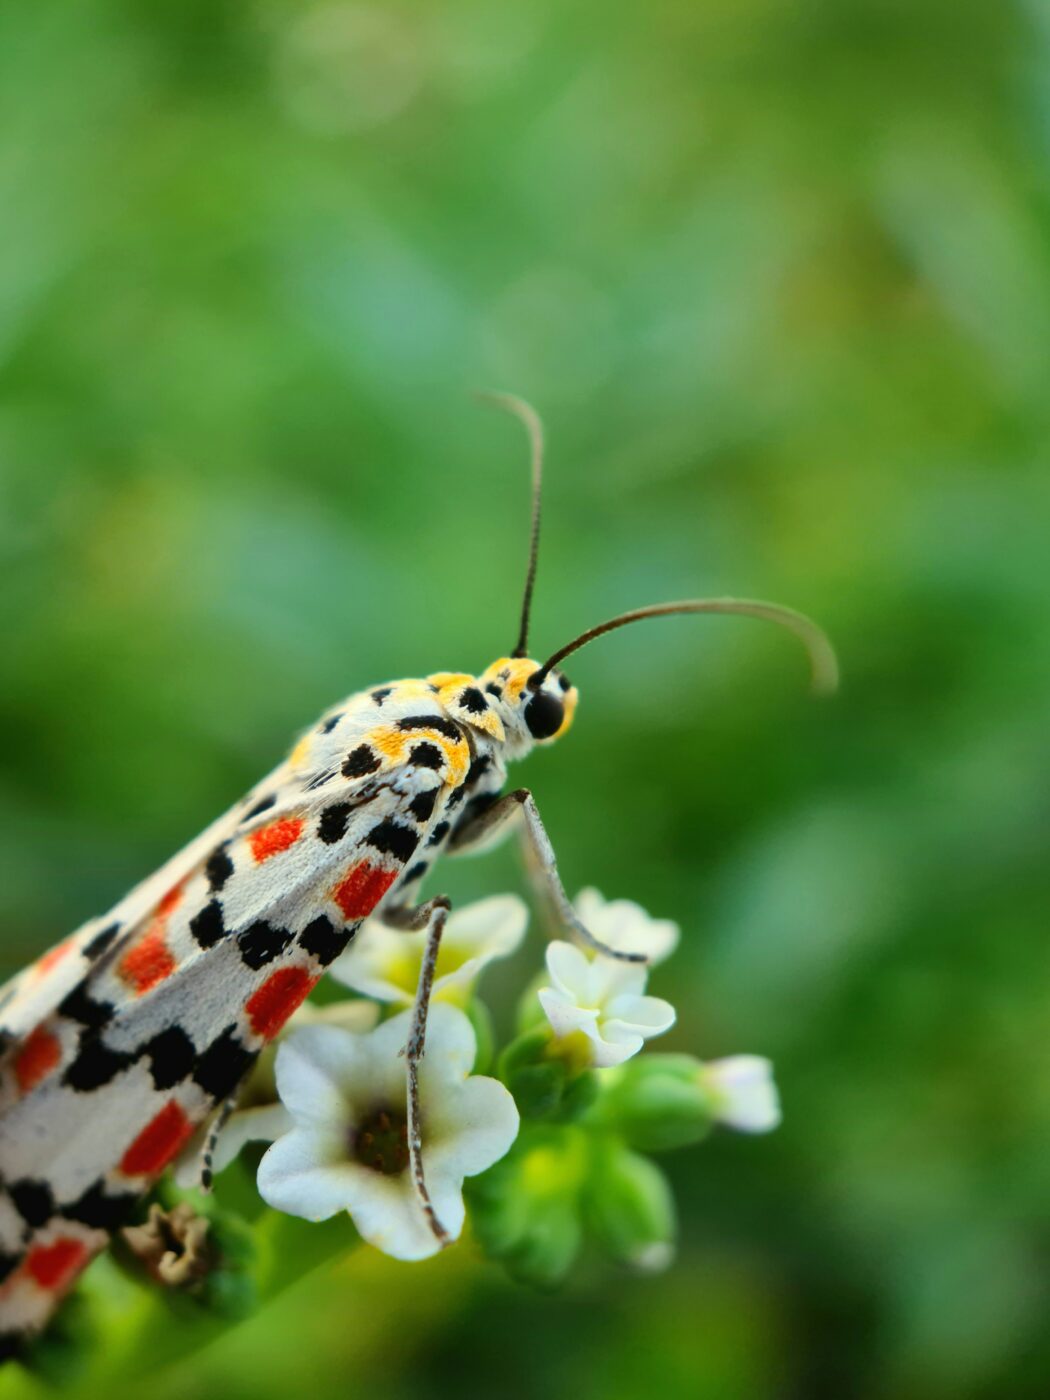 A white moth, spotted all over with beautiful red, orange, yellow, and black patterns, is perched onto delicate white flowers that contrast against the lush background greenery. This photo reflects nature's astounding colors and beauty.